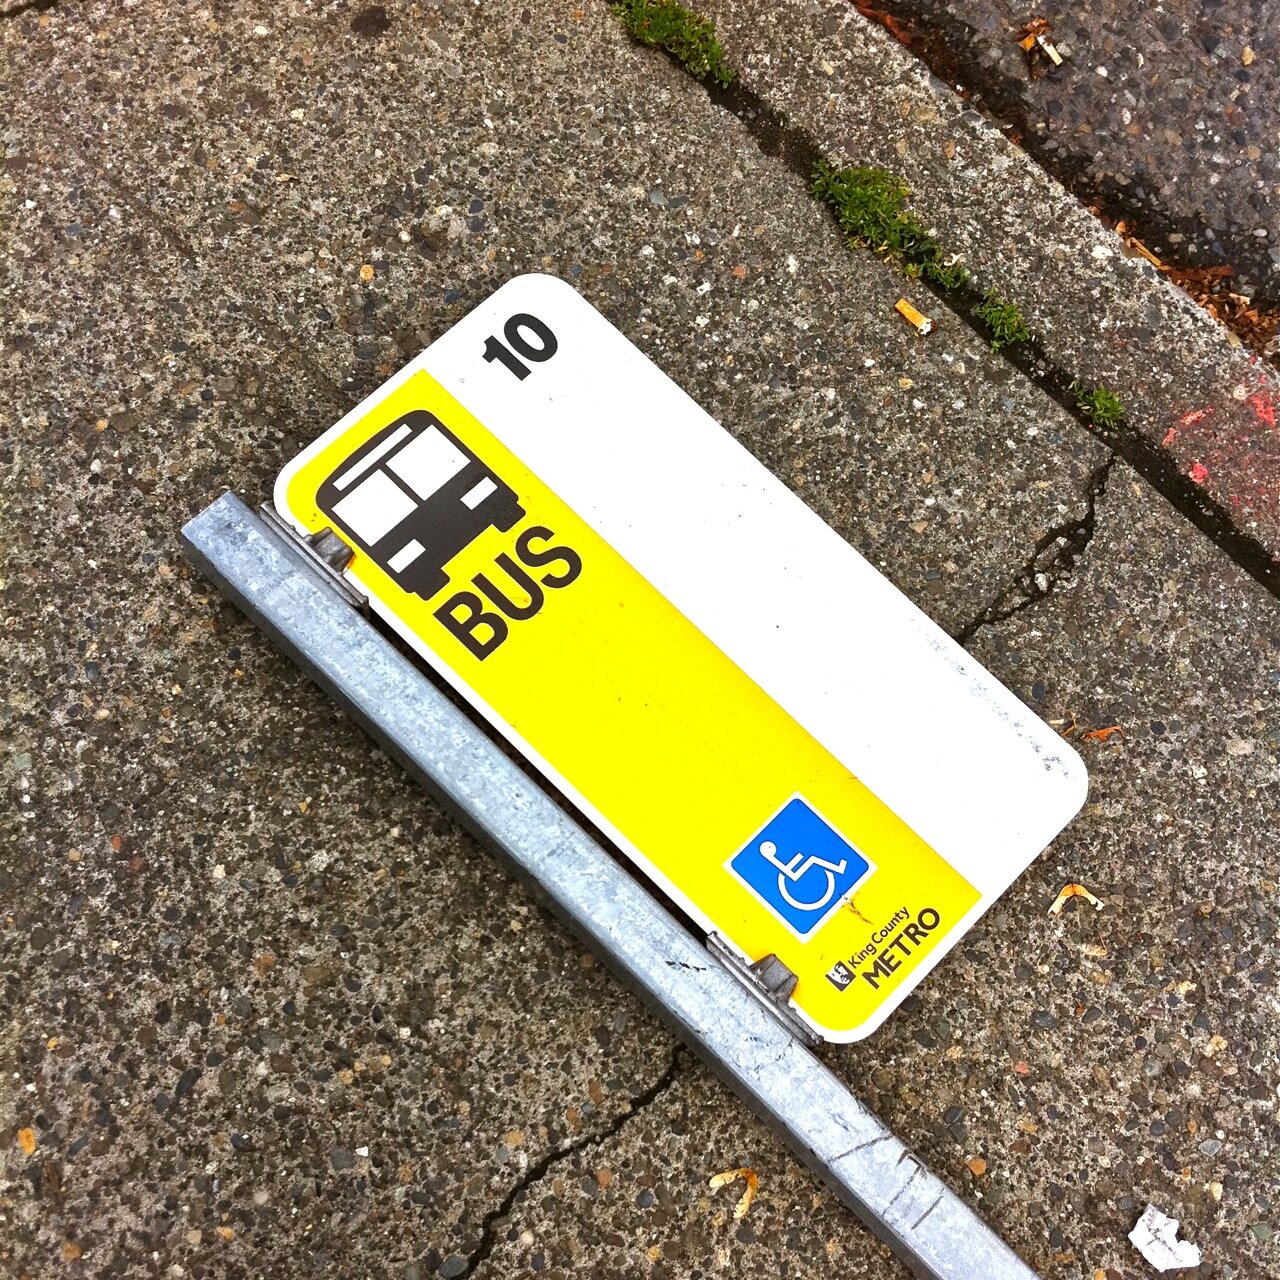 Metro hasn't had the money or time to replace this downed bus stop sign. (Photo: MvB)